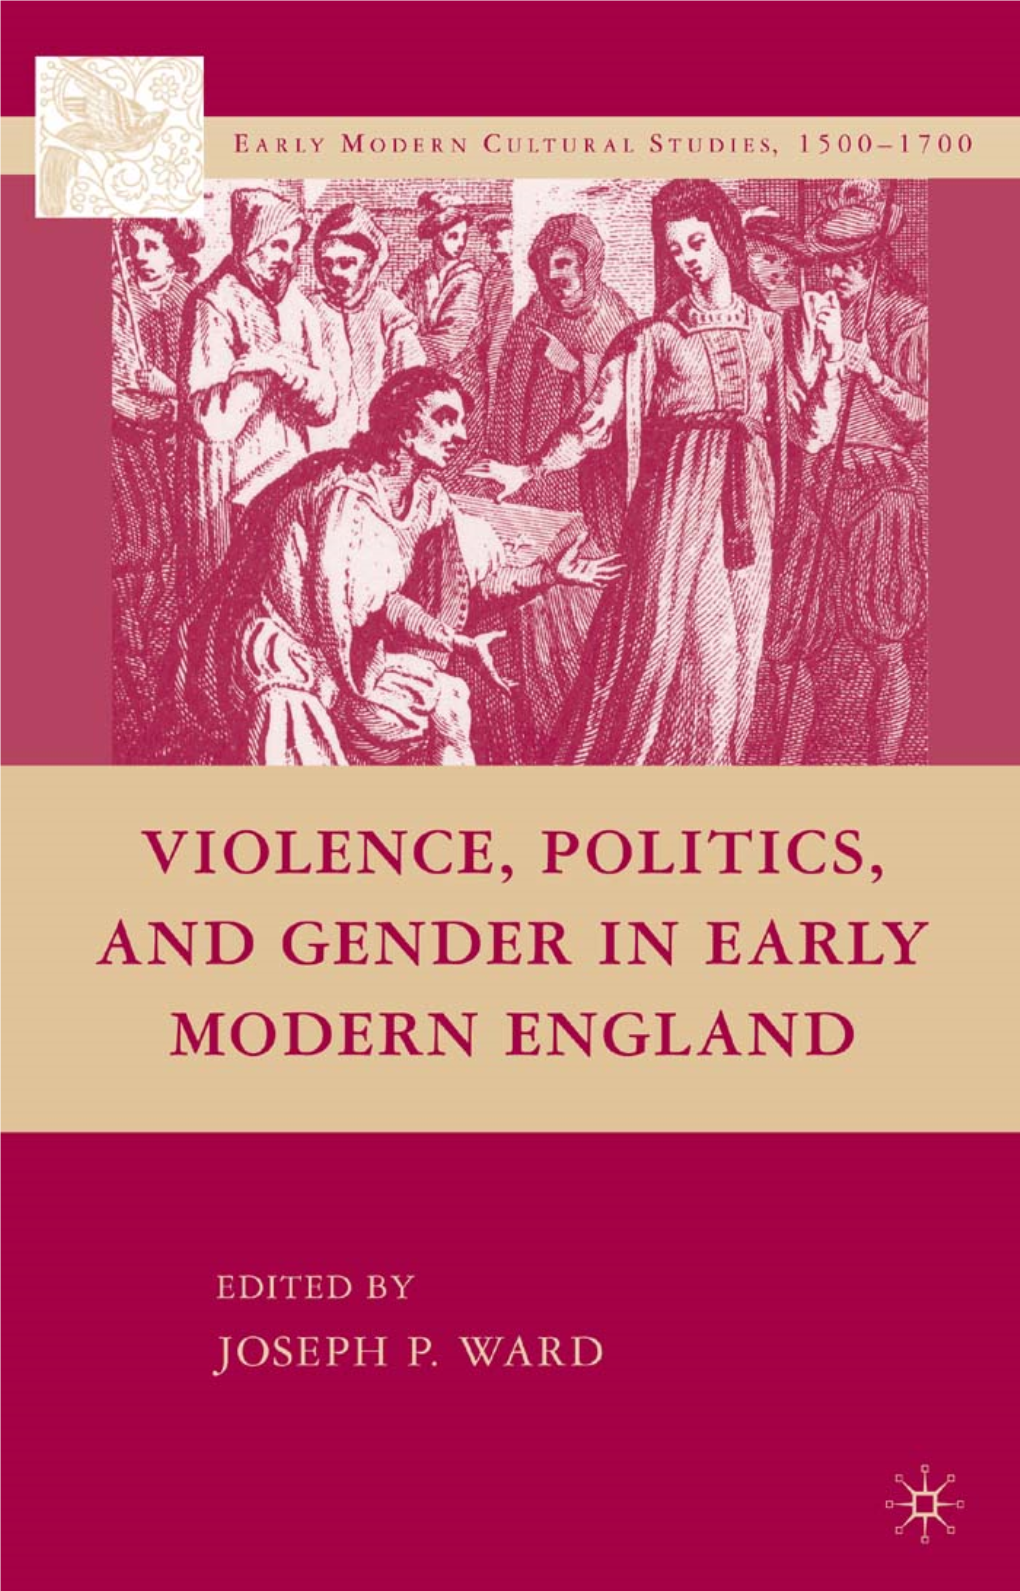 Violence, Politics, and Gender in Early Modern England Edited by Joseph P